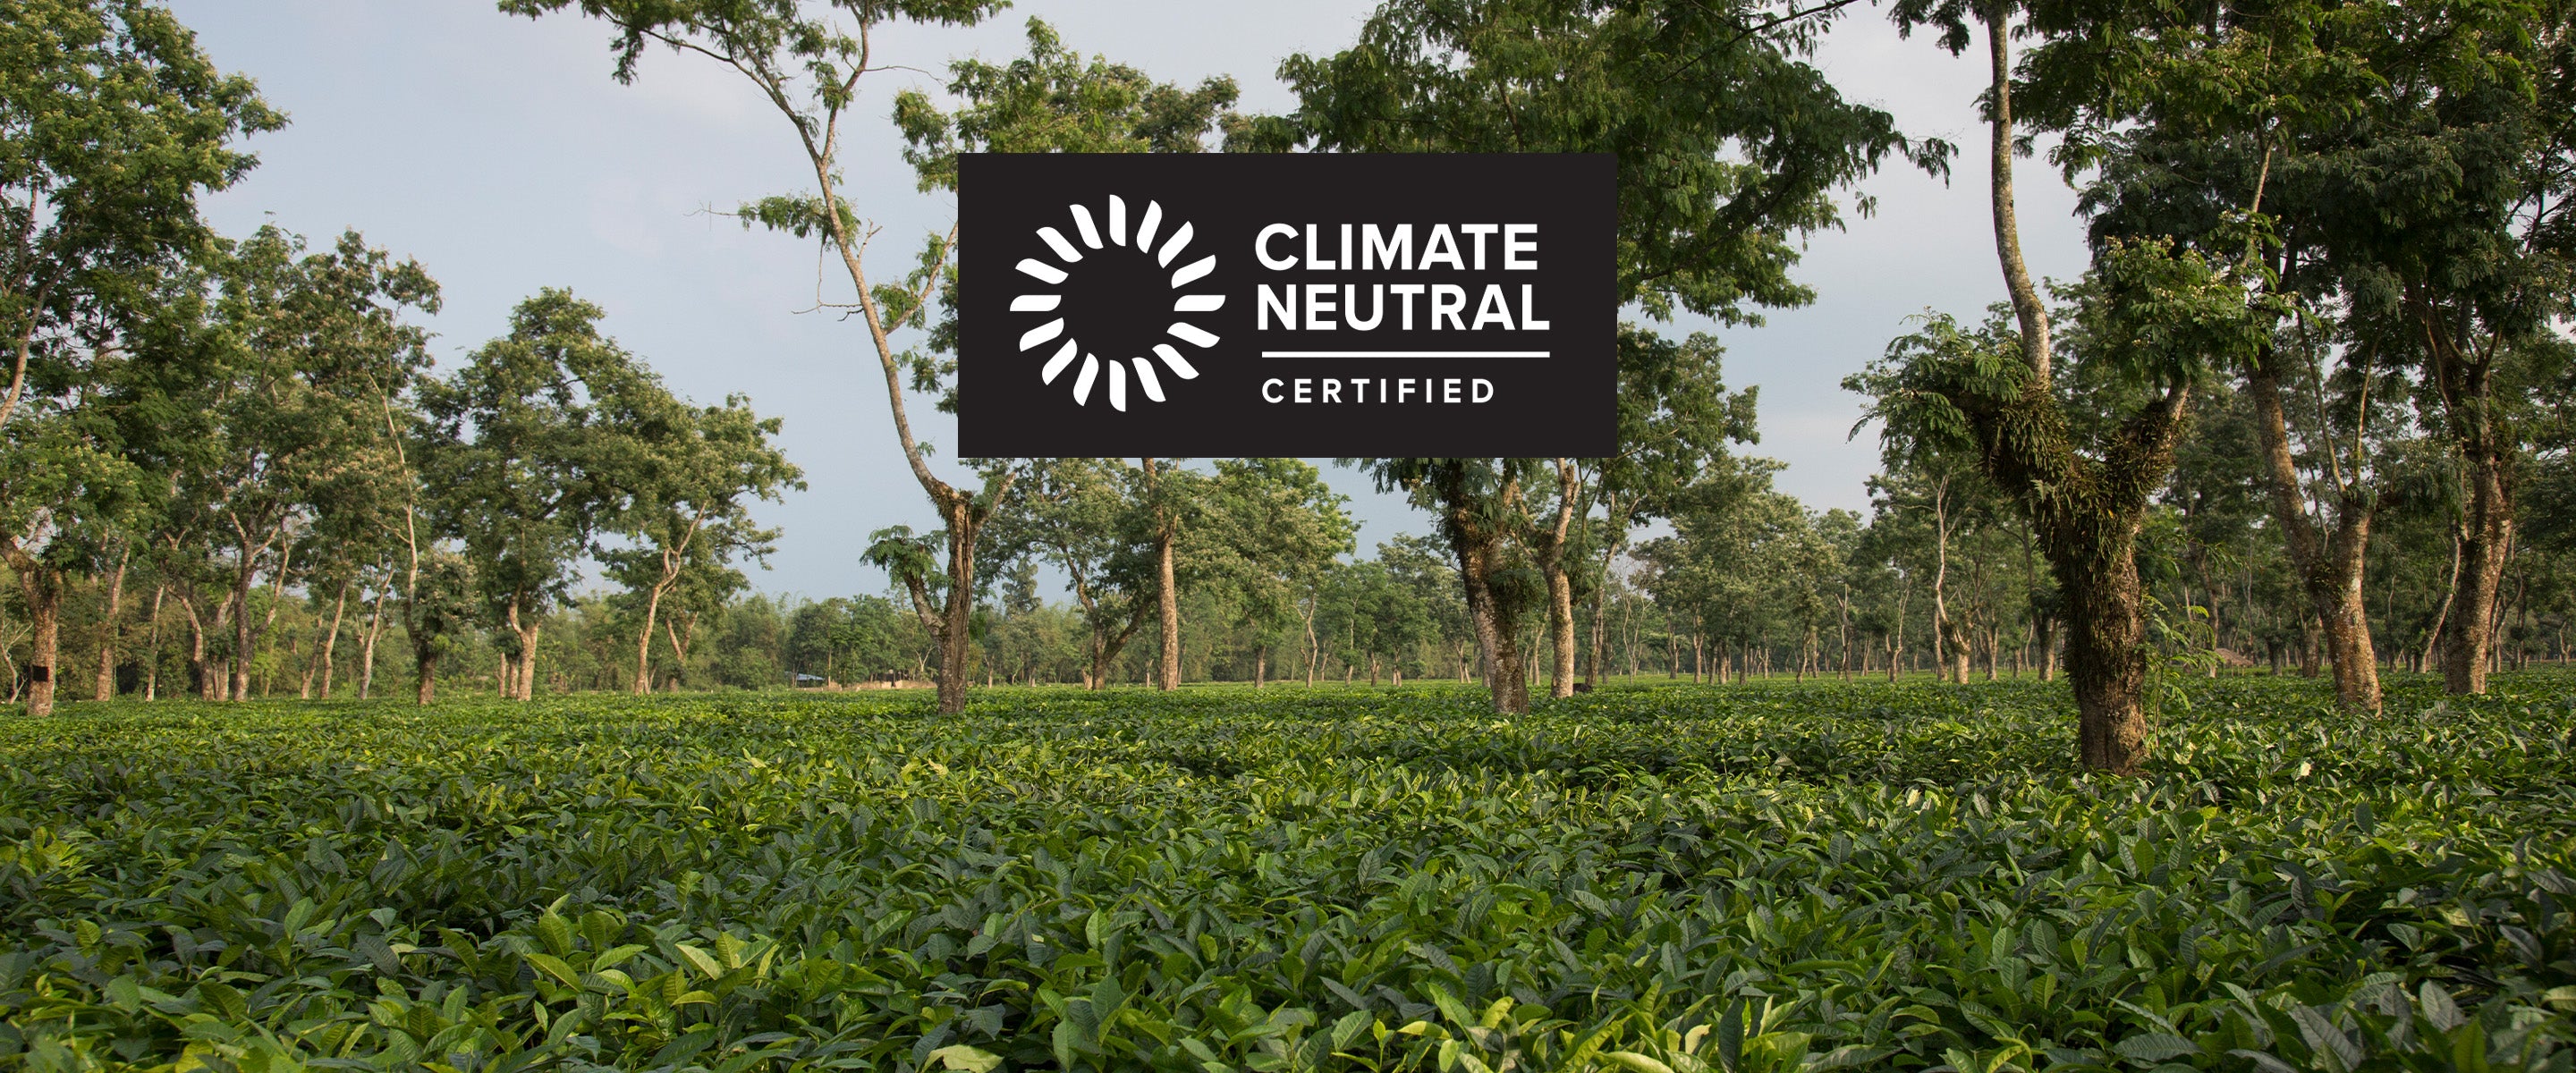 A Tea Estate in India with the Climate Neutral Logo